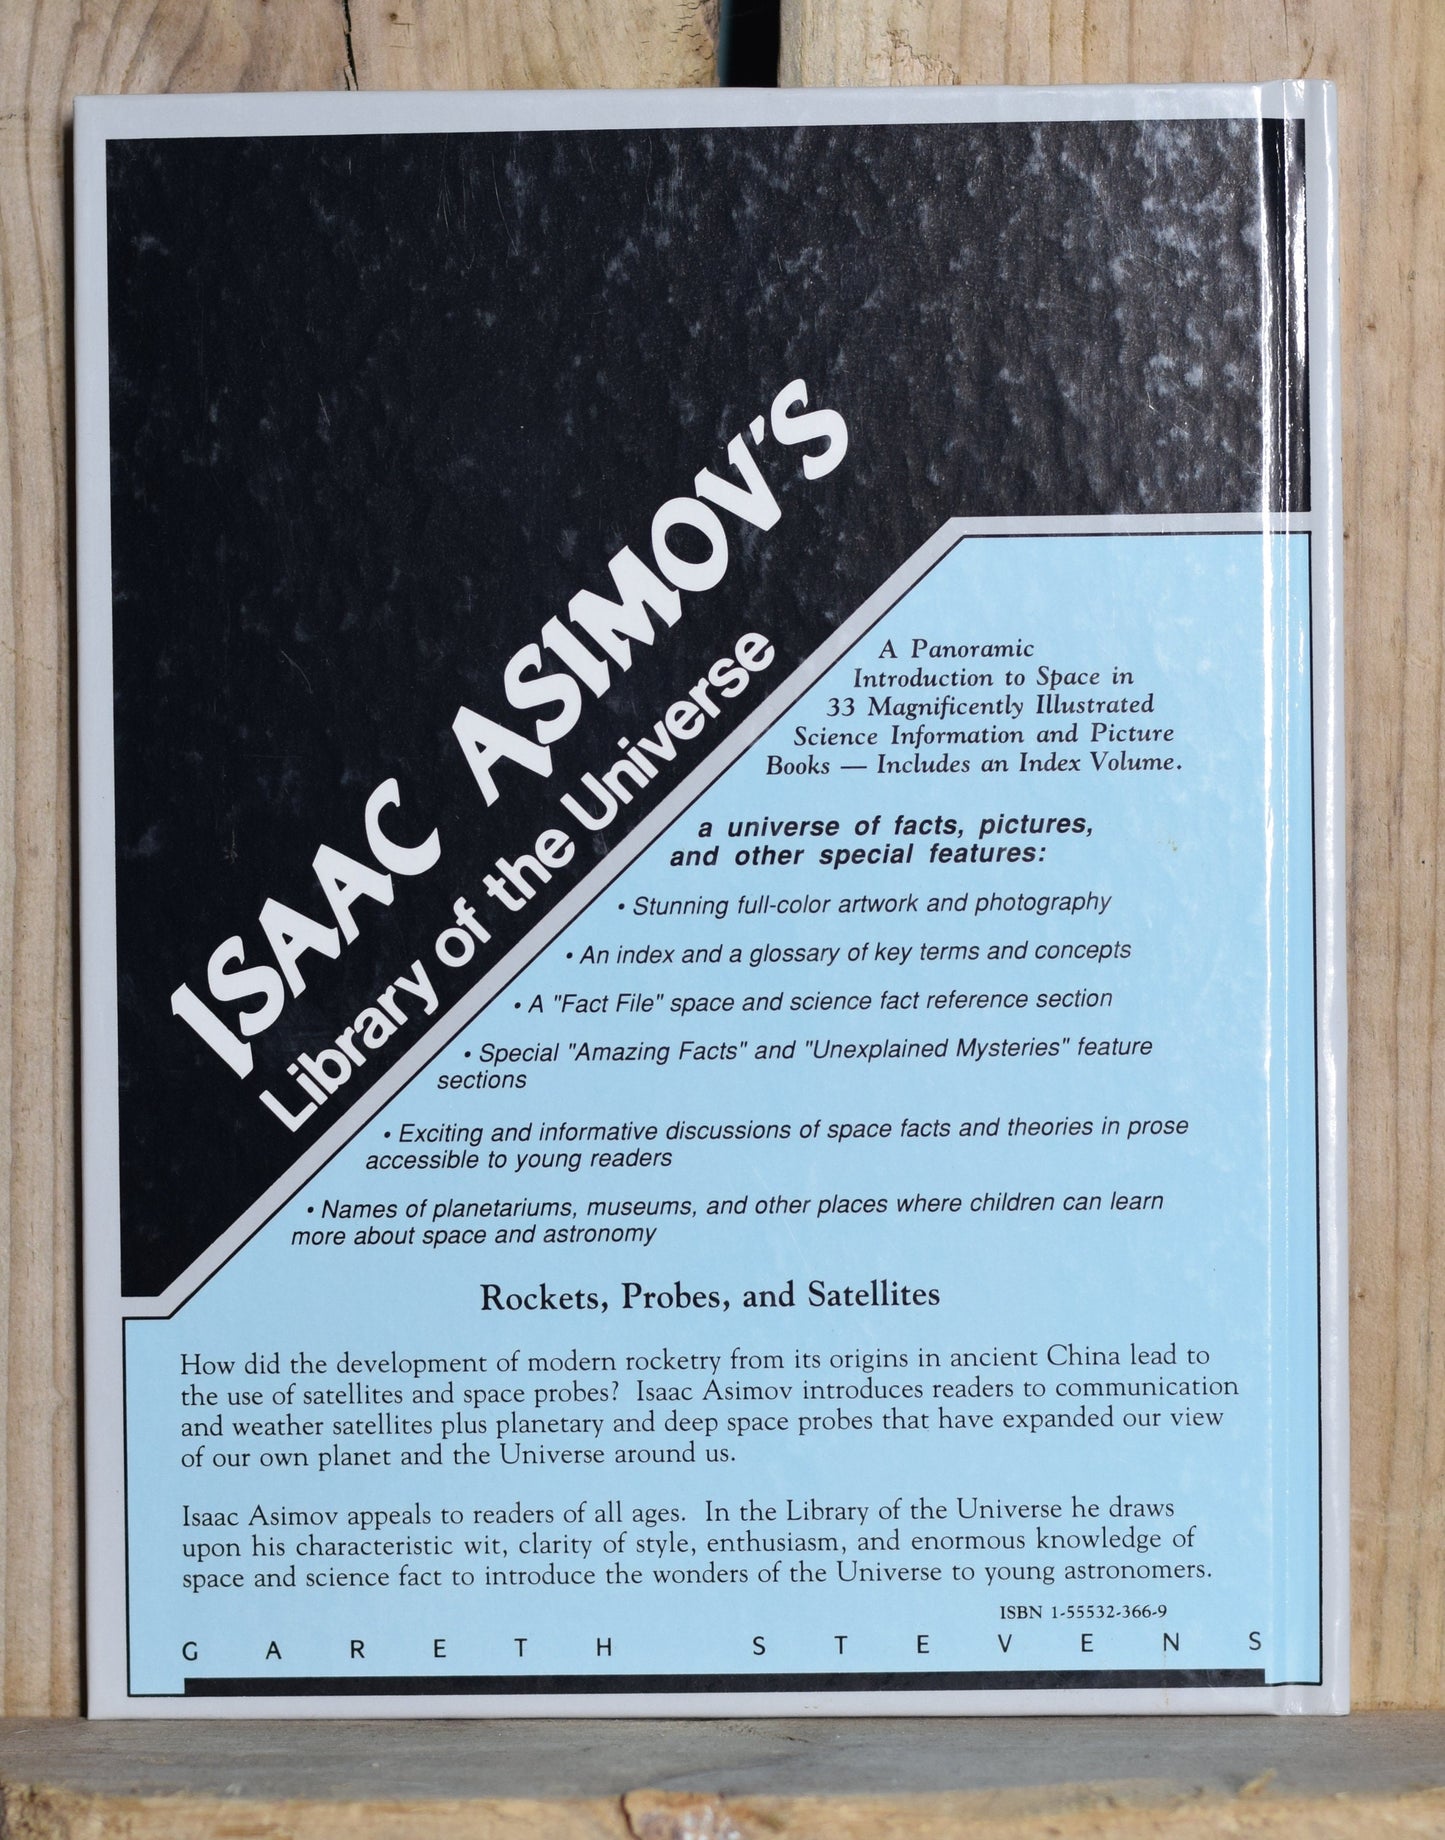 Vintage Sci-fi Hardback: Isaac Asimov's Library of the Universe - Rockets, Probes and Satellites